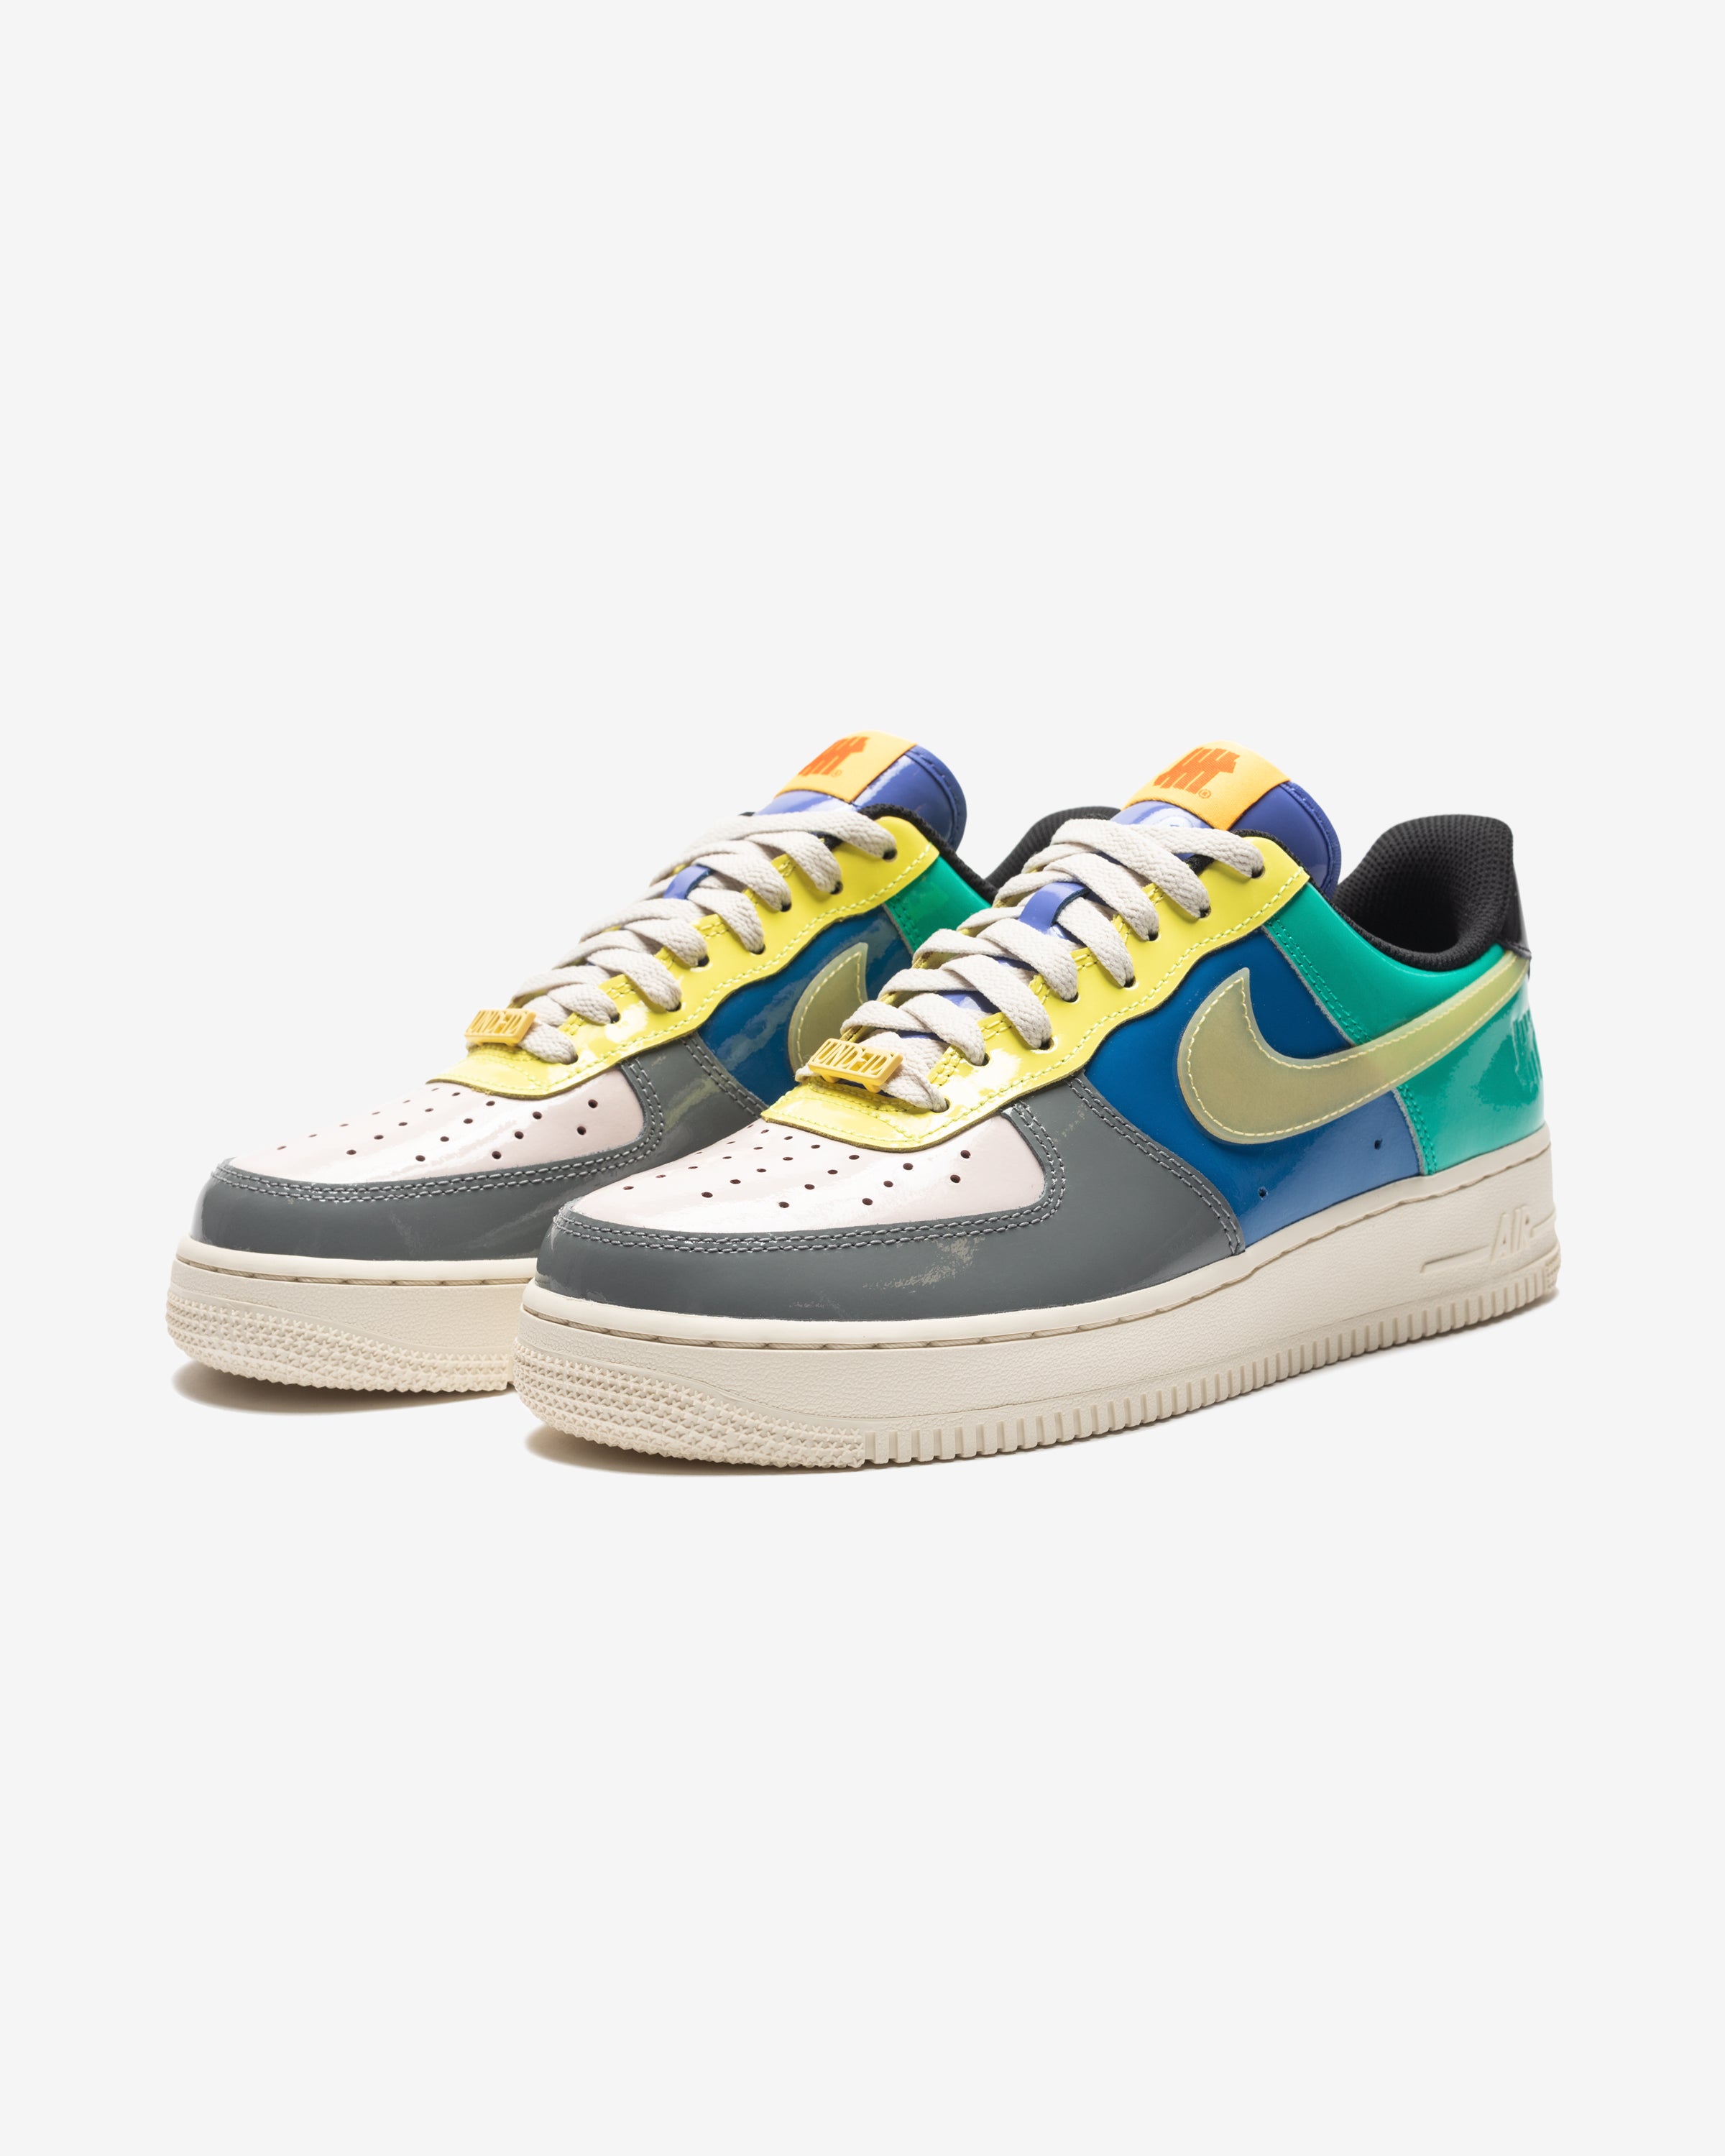 UNDEFEATED NIKE AIR FORCE 1 LOW SP - SMOKEGREY/ GOLD/ MULTI – Undefeated